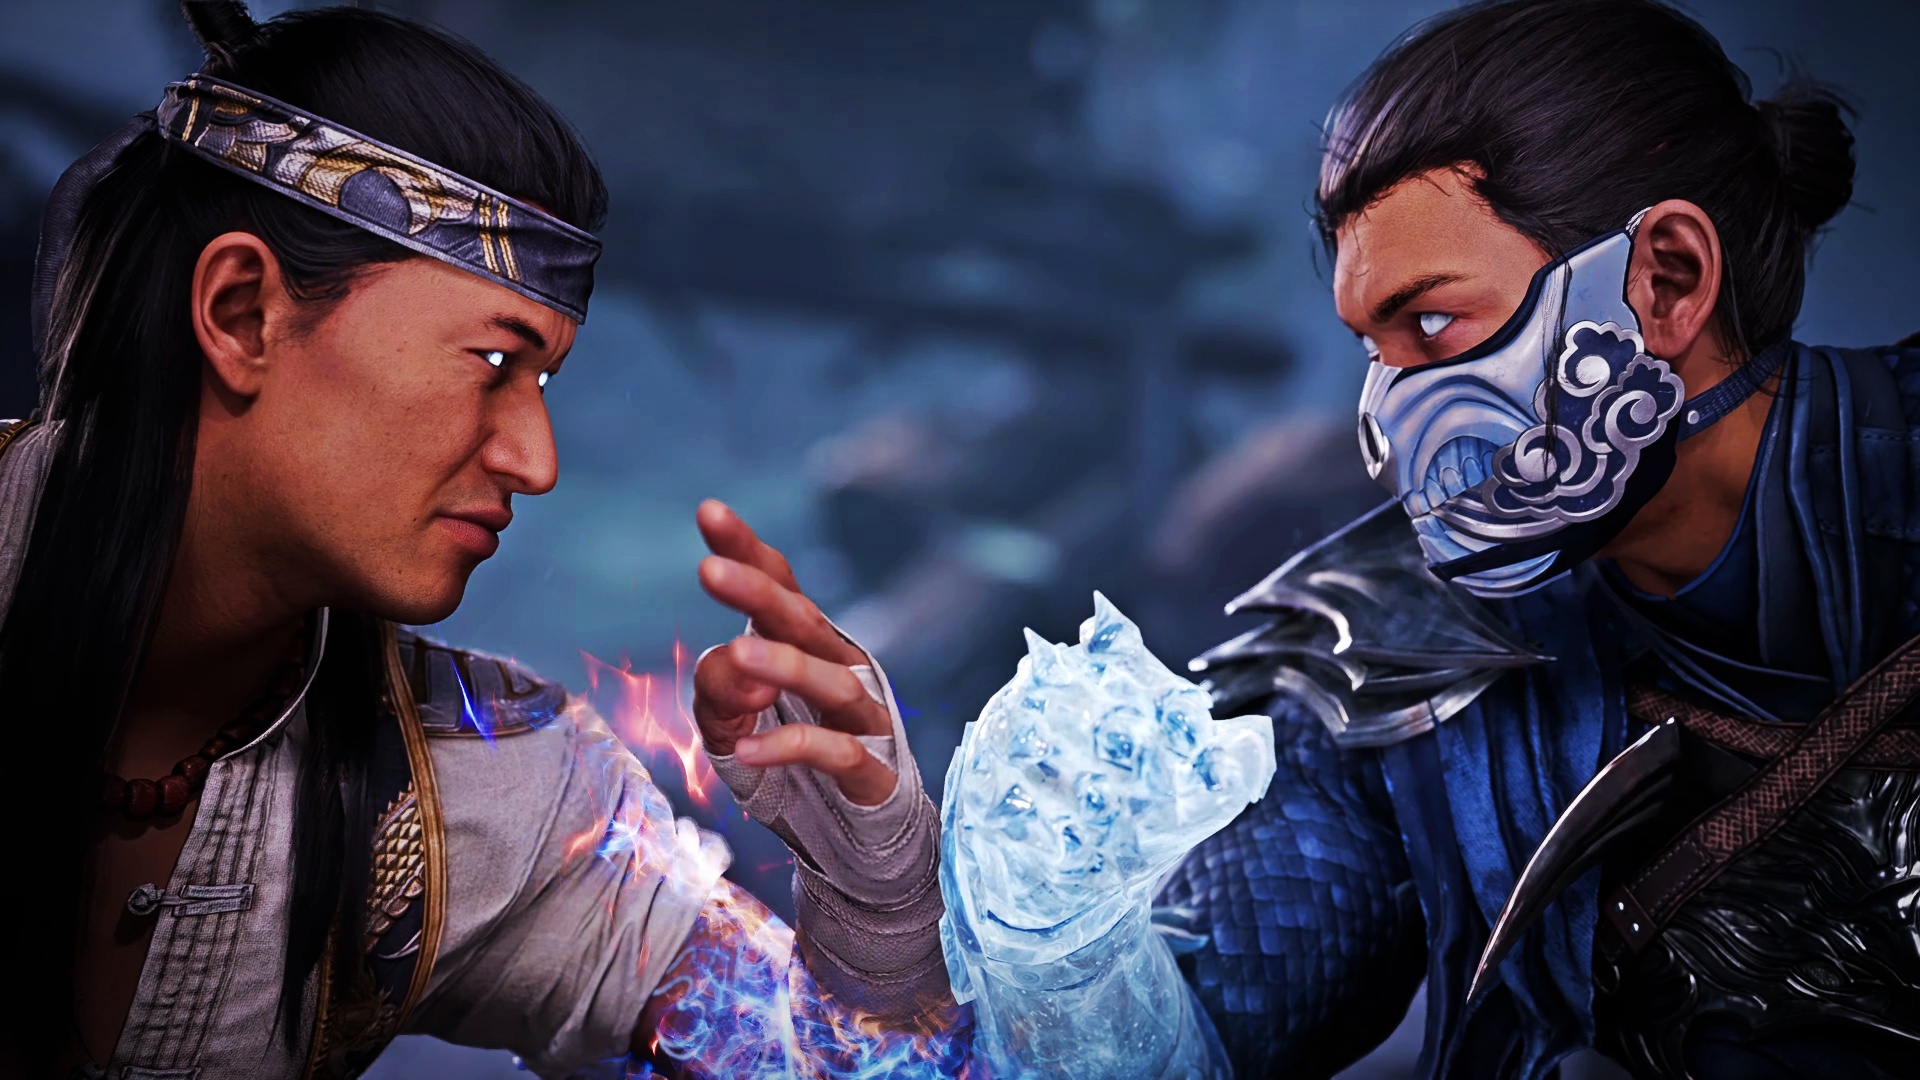 Mortal Kombat 1 Crossplay Will Not be Available at Launch